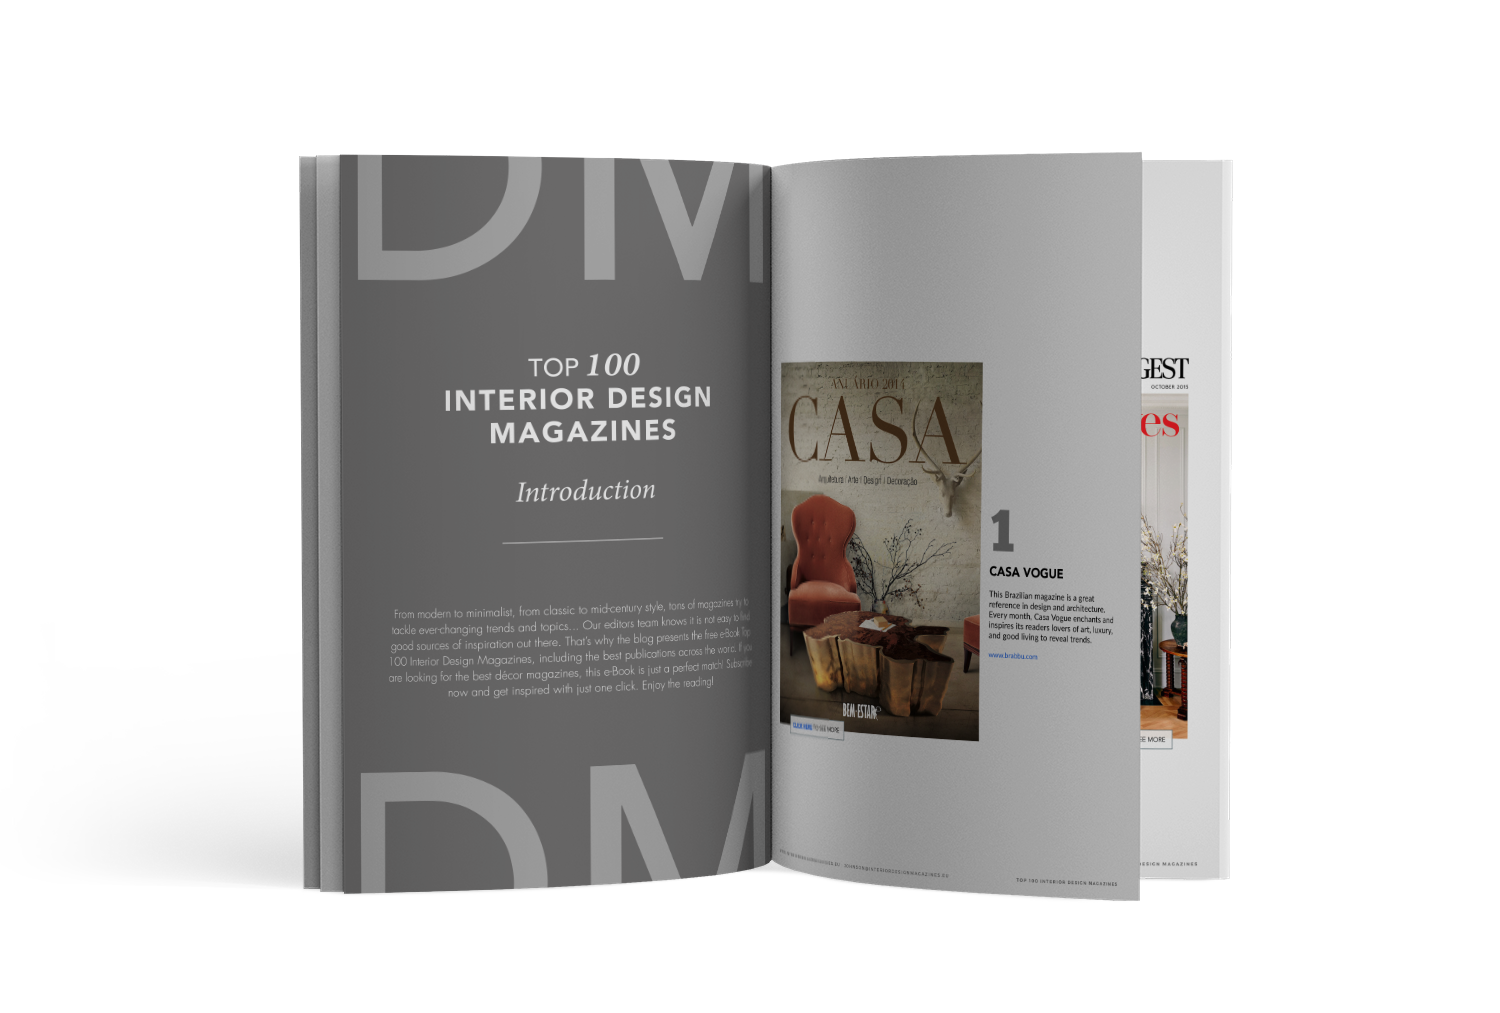 DOWNLOAD FREE EBOOK - Top 100 Interior Decorating Magazines Every Interior Designer Should Know ➤ To see more news about the Interior Magazines in the world visit us at www.interiordesignmagazines.eu #interiordesignmagazines #designmagazines #interiordesign @imagazines